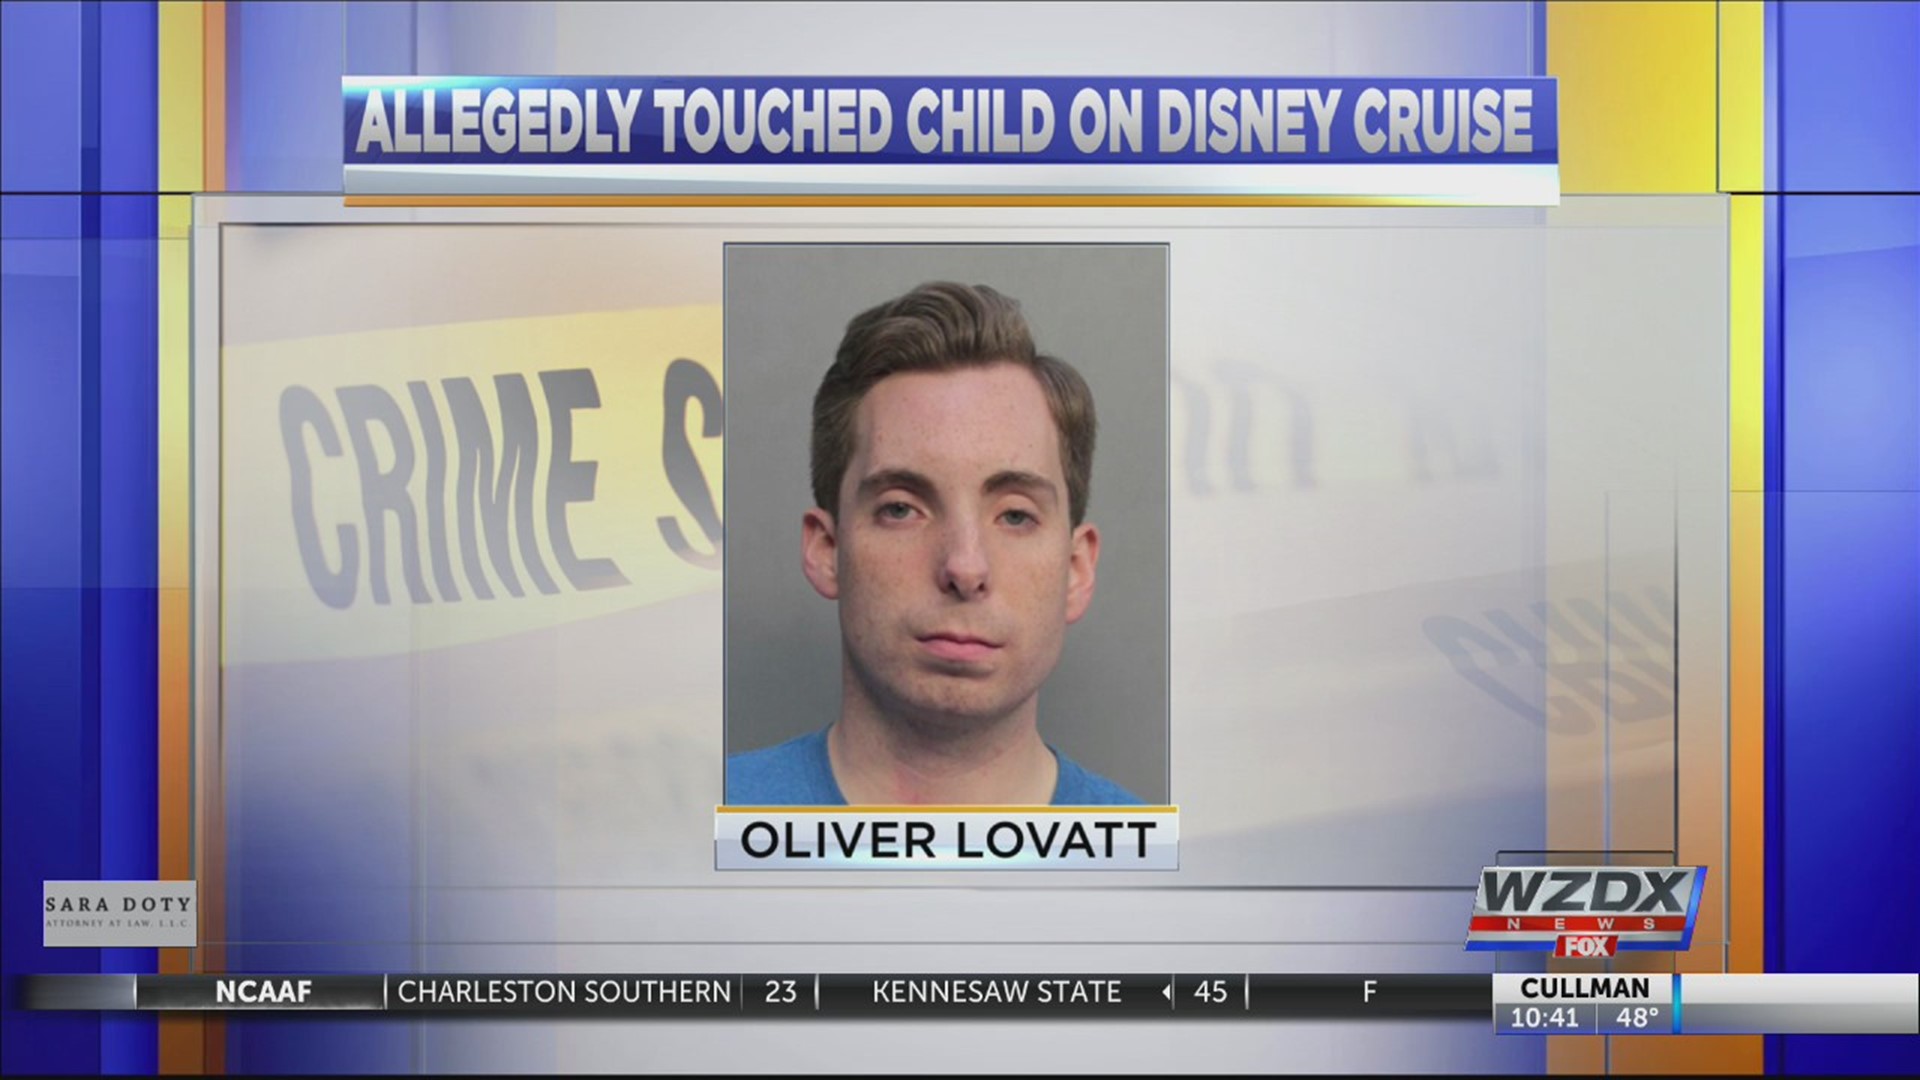 A Disney Youth Host accused of fondling a child onboard a Disney cruise ship back in April is scheduled to go to trial in Miami later this month.